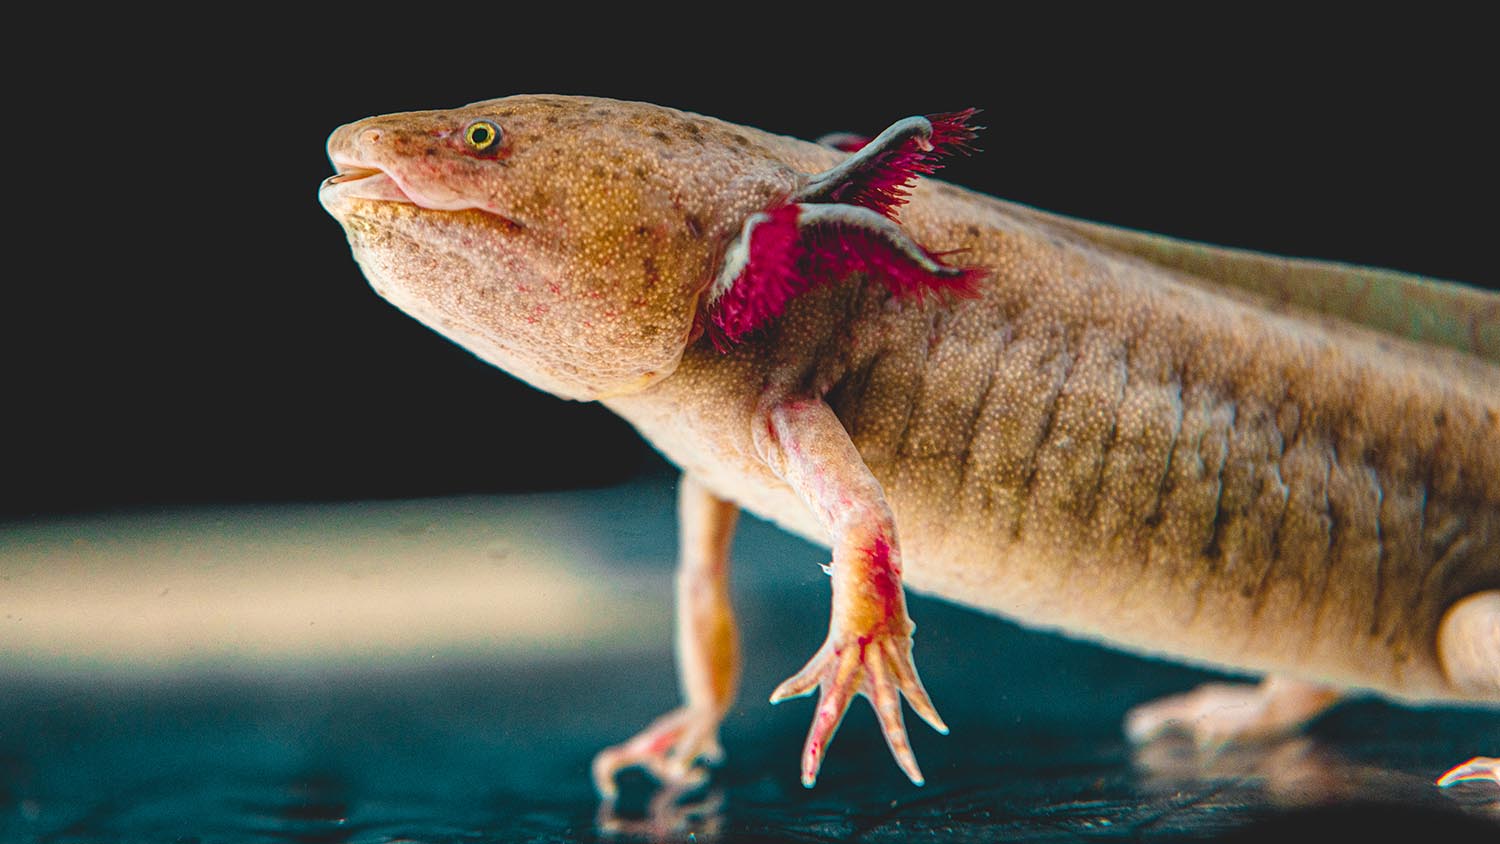 Do Axolotls Like to Be Touched? Understanding the Sensitivity and Care of Your Axolotl